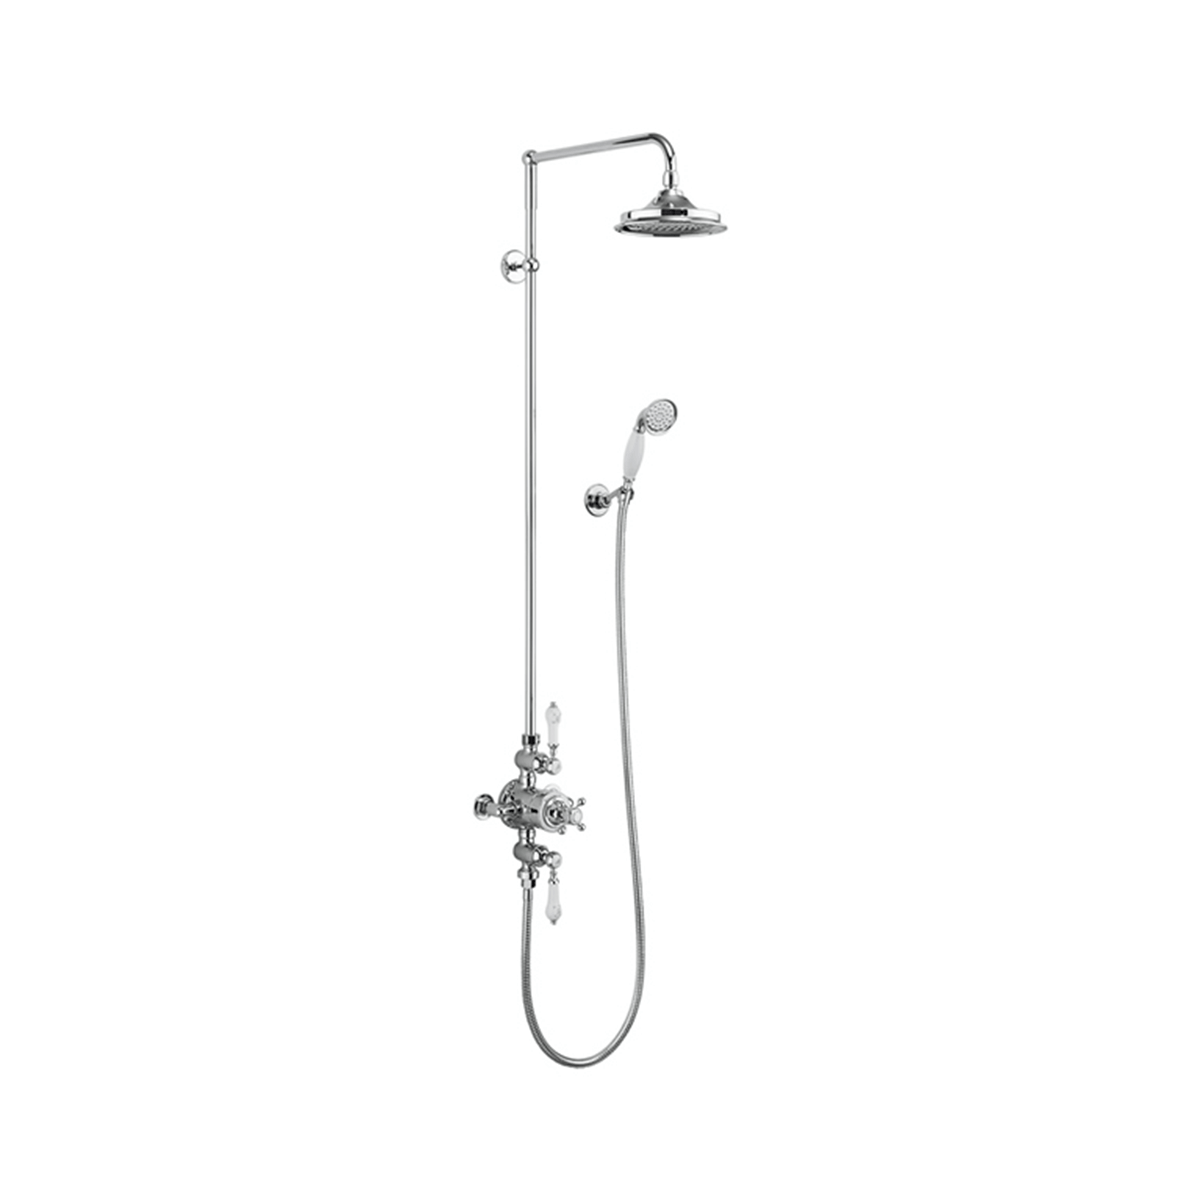 Burlington Avon Exposed Thermostatic Dual Function Shower Valve with Vertical Riser, Fixed Head and Handset